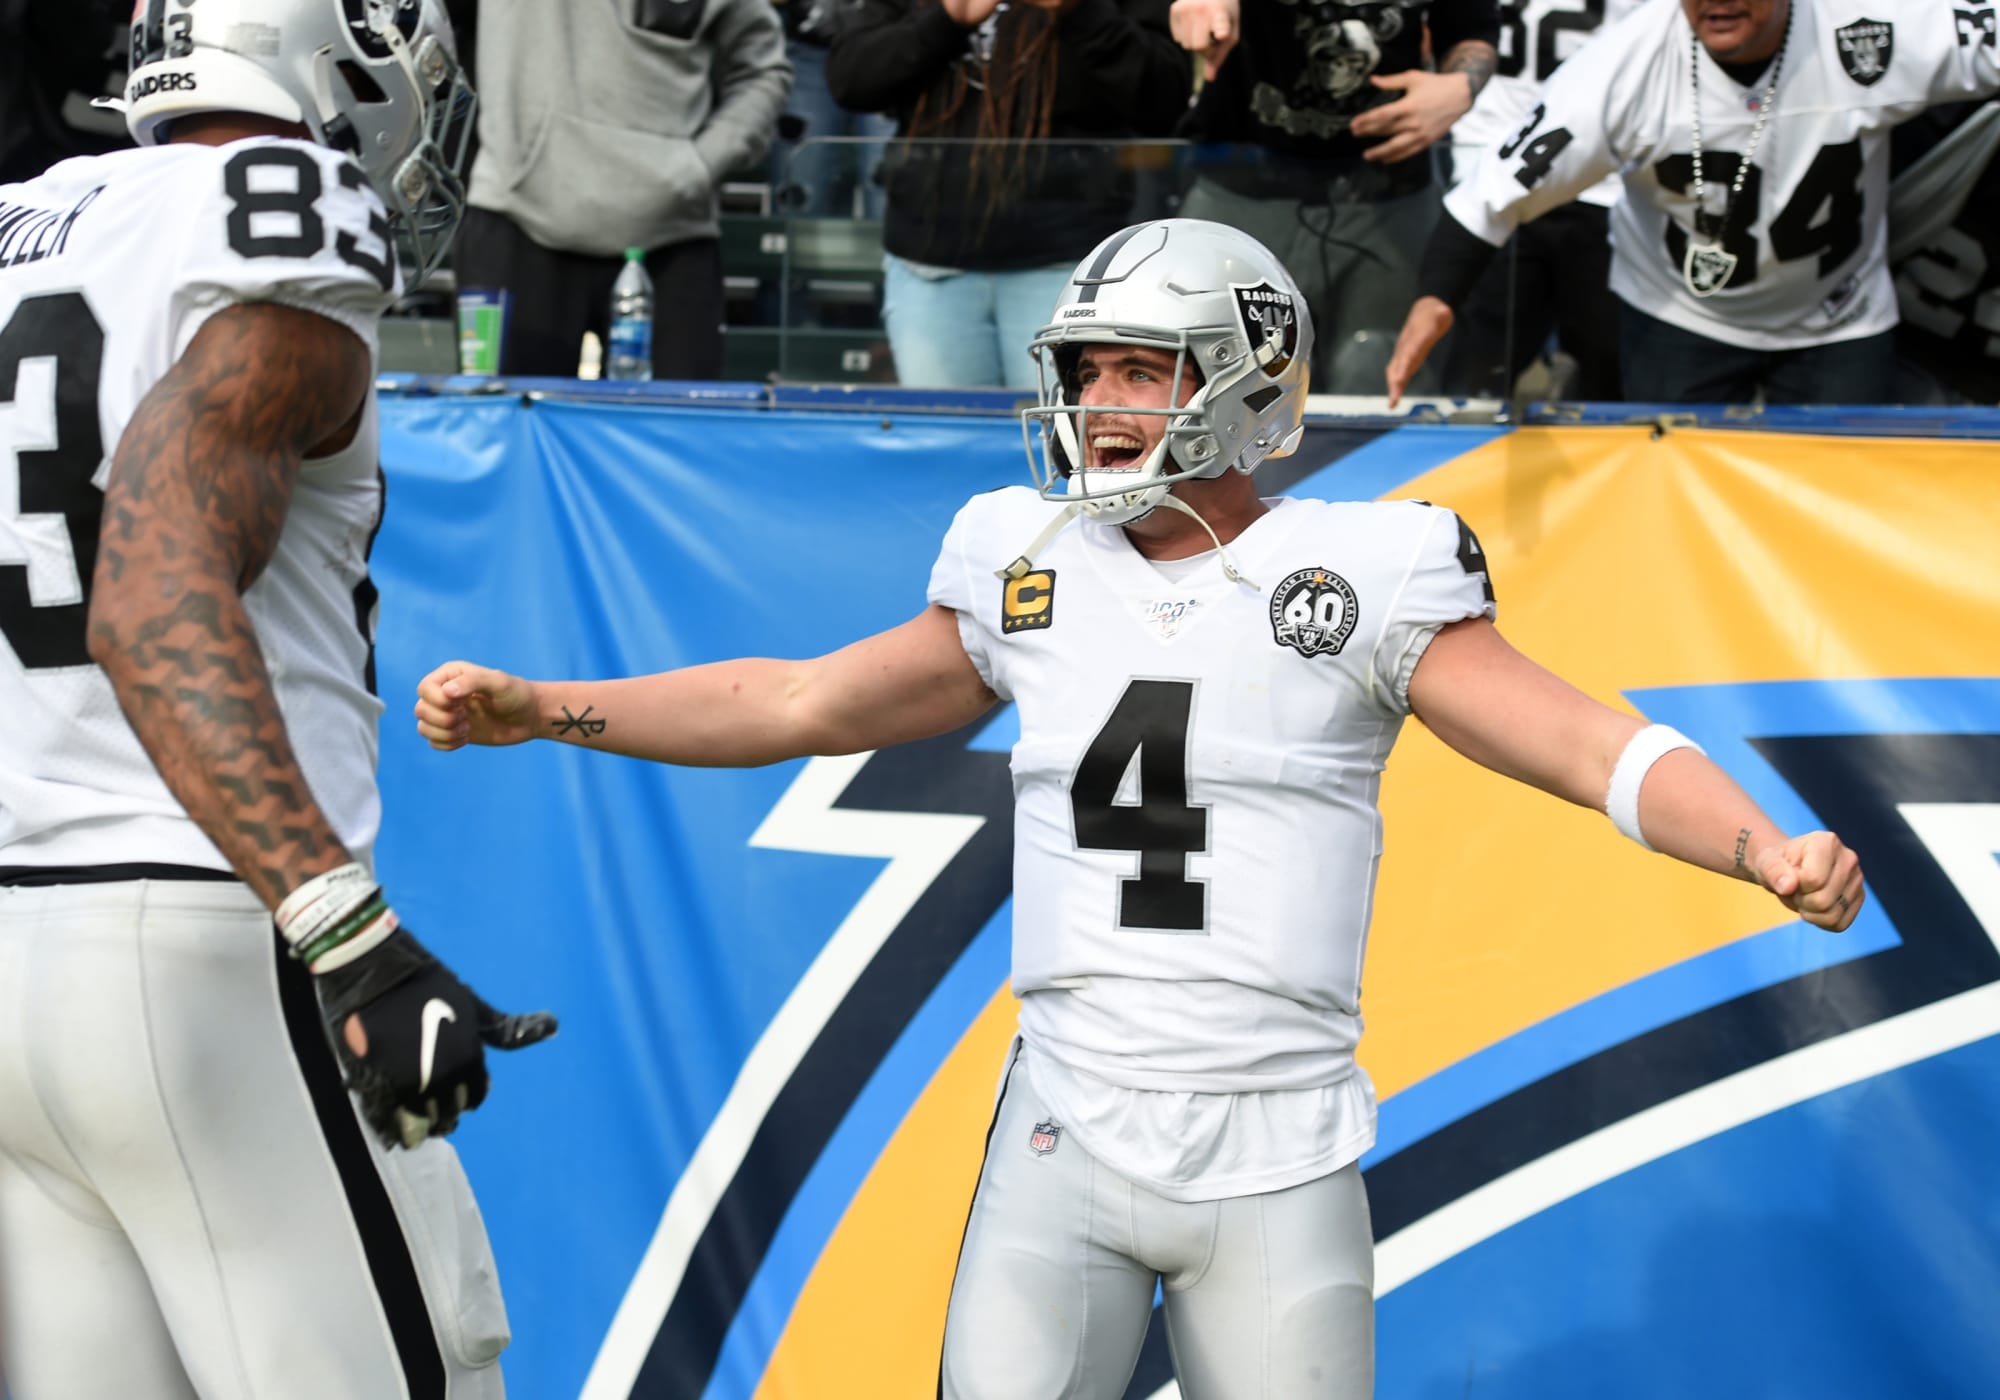 Here's what needs to happen for the Raiders to make the playoffs